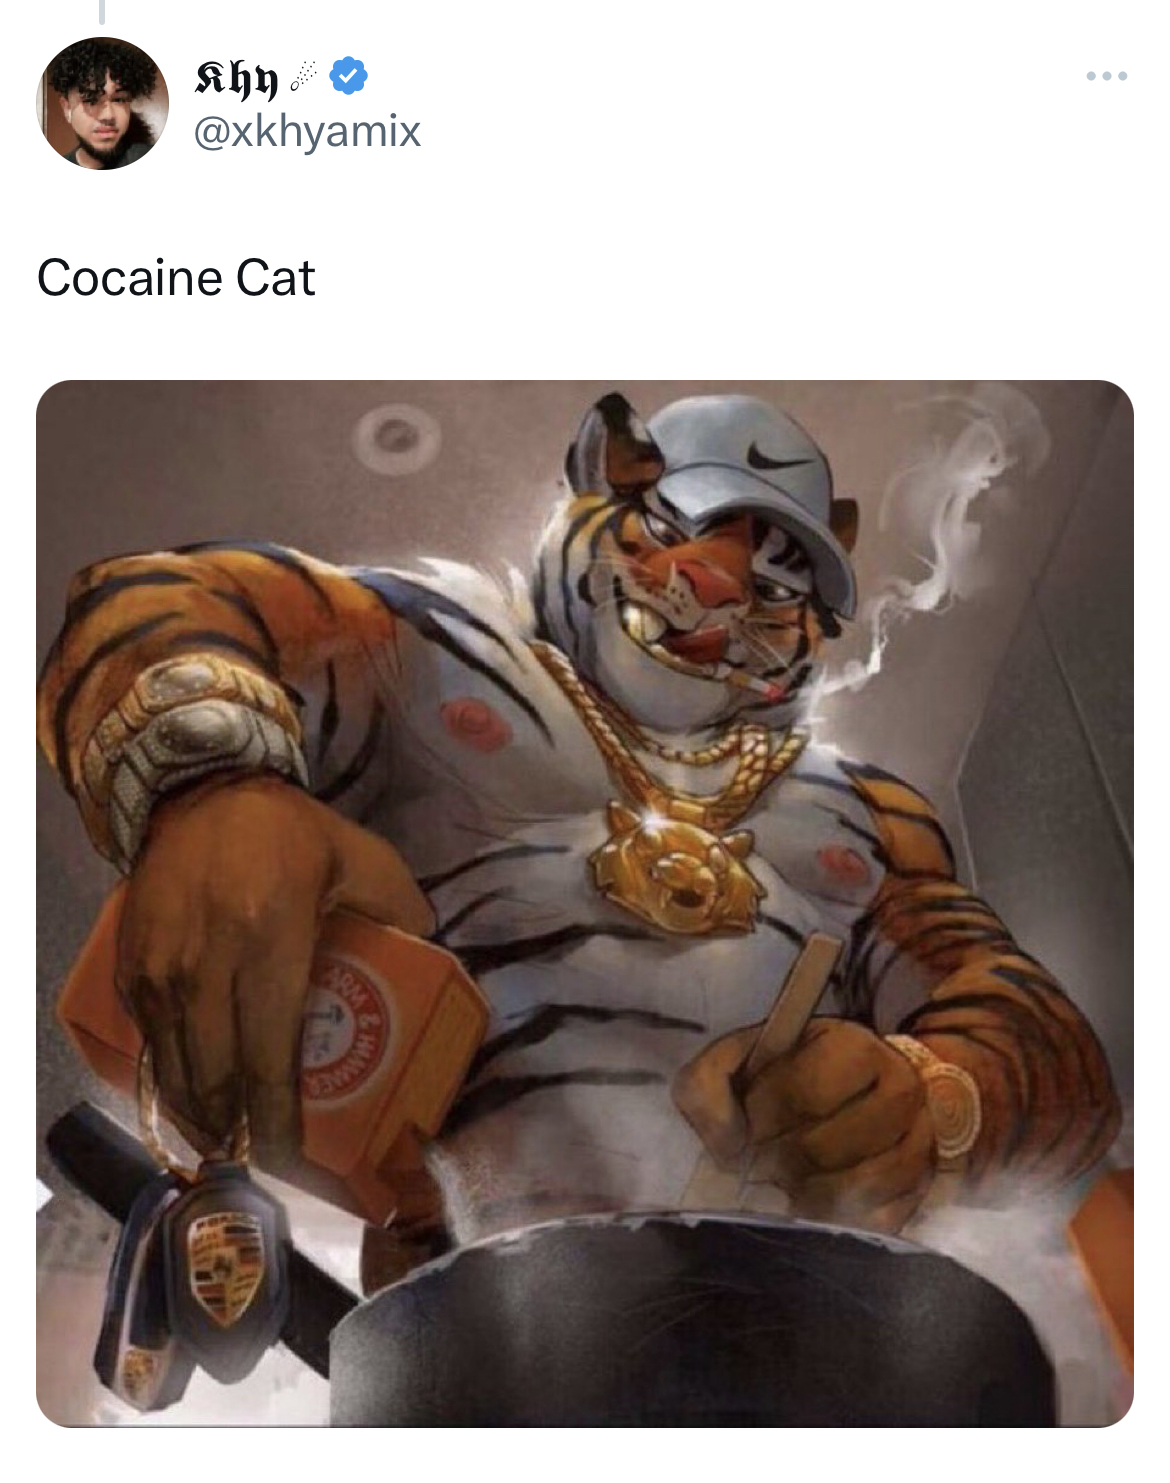 Ohio Cocaine Cat memes - pledge allegiance to the grind i m up early as hell tryna get mine - Khy Cocaine Cat 165